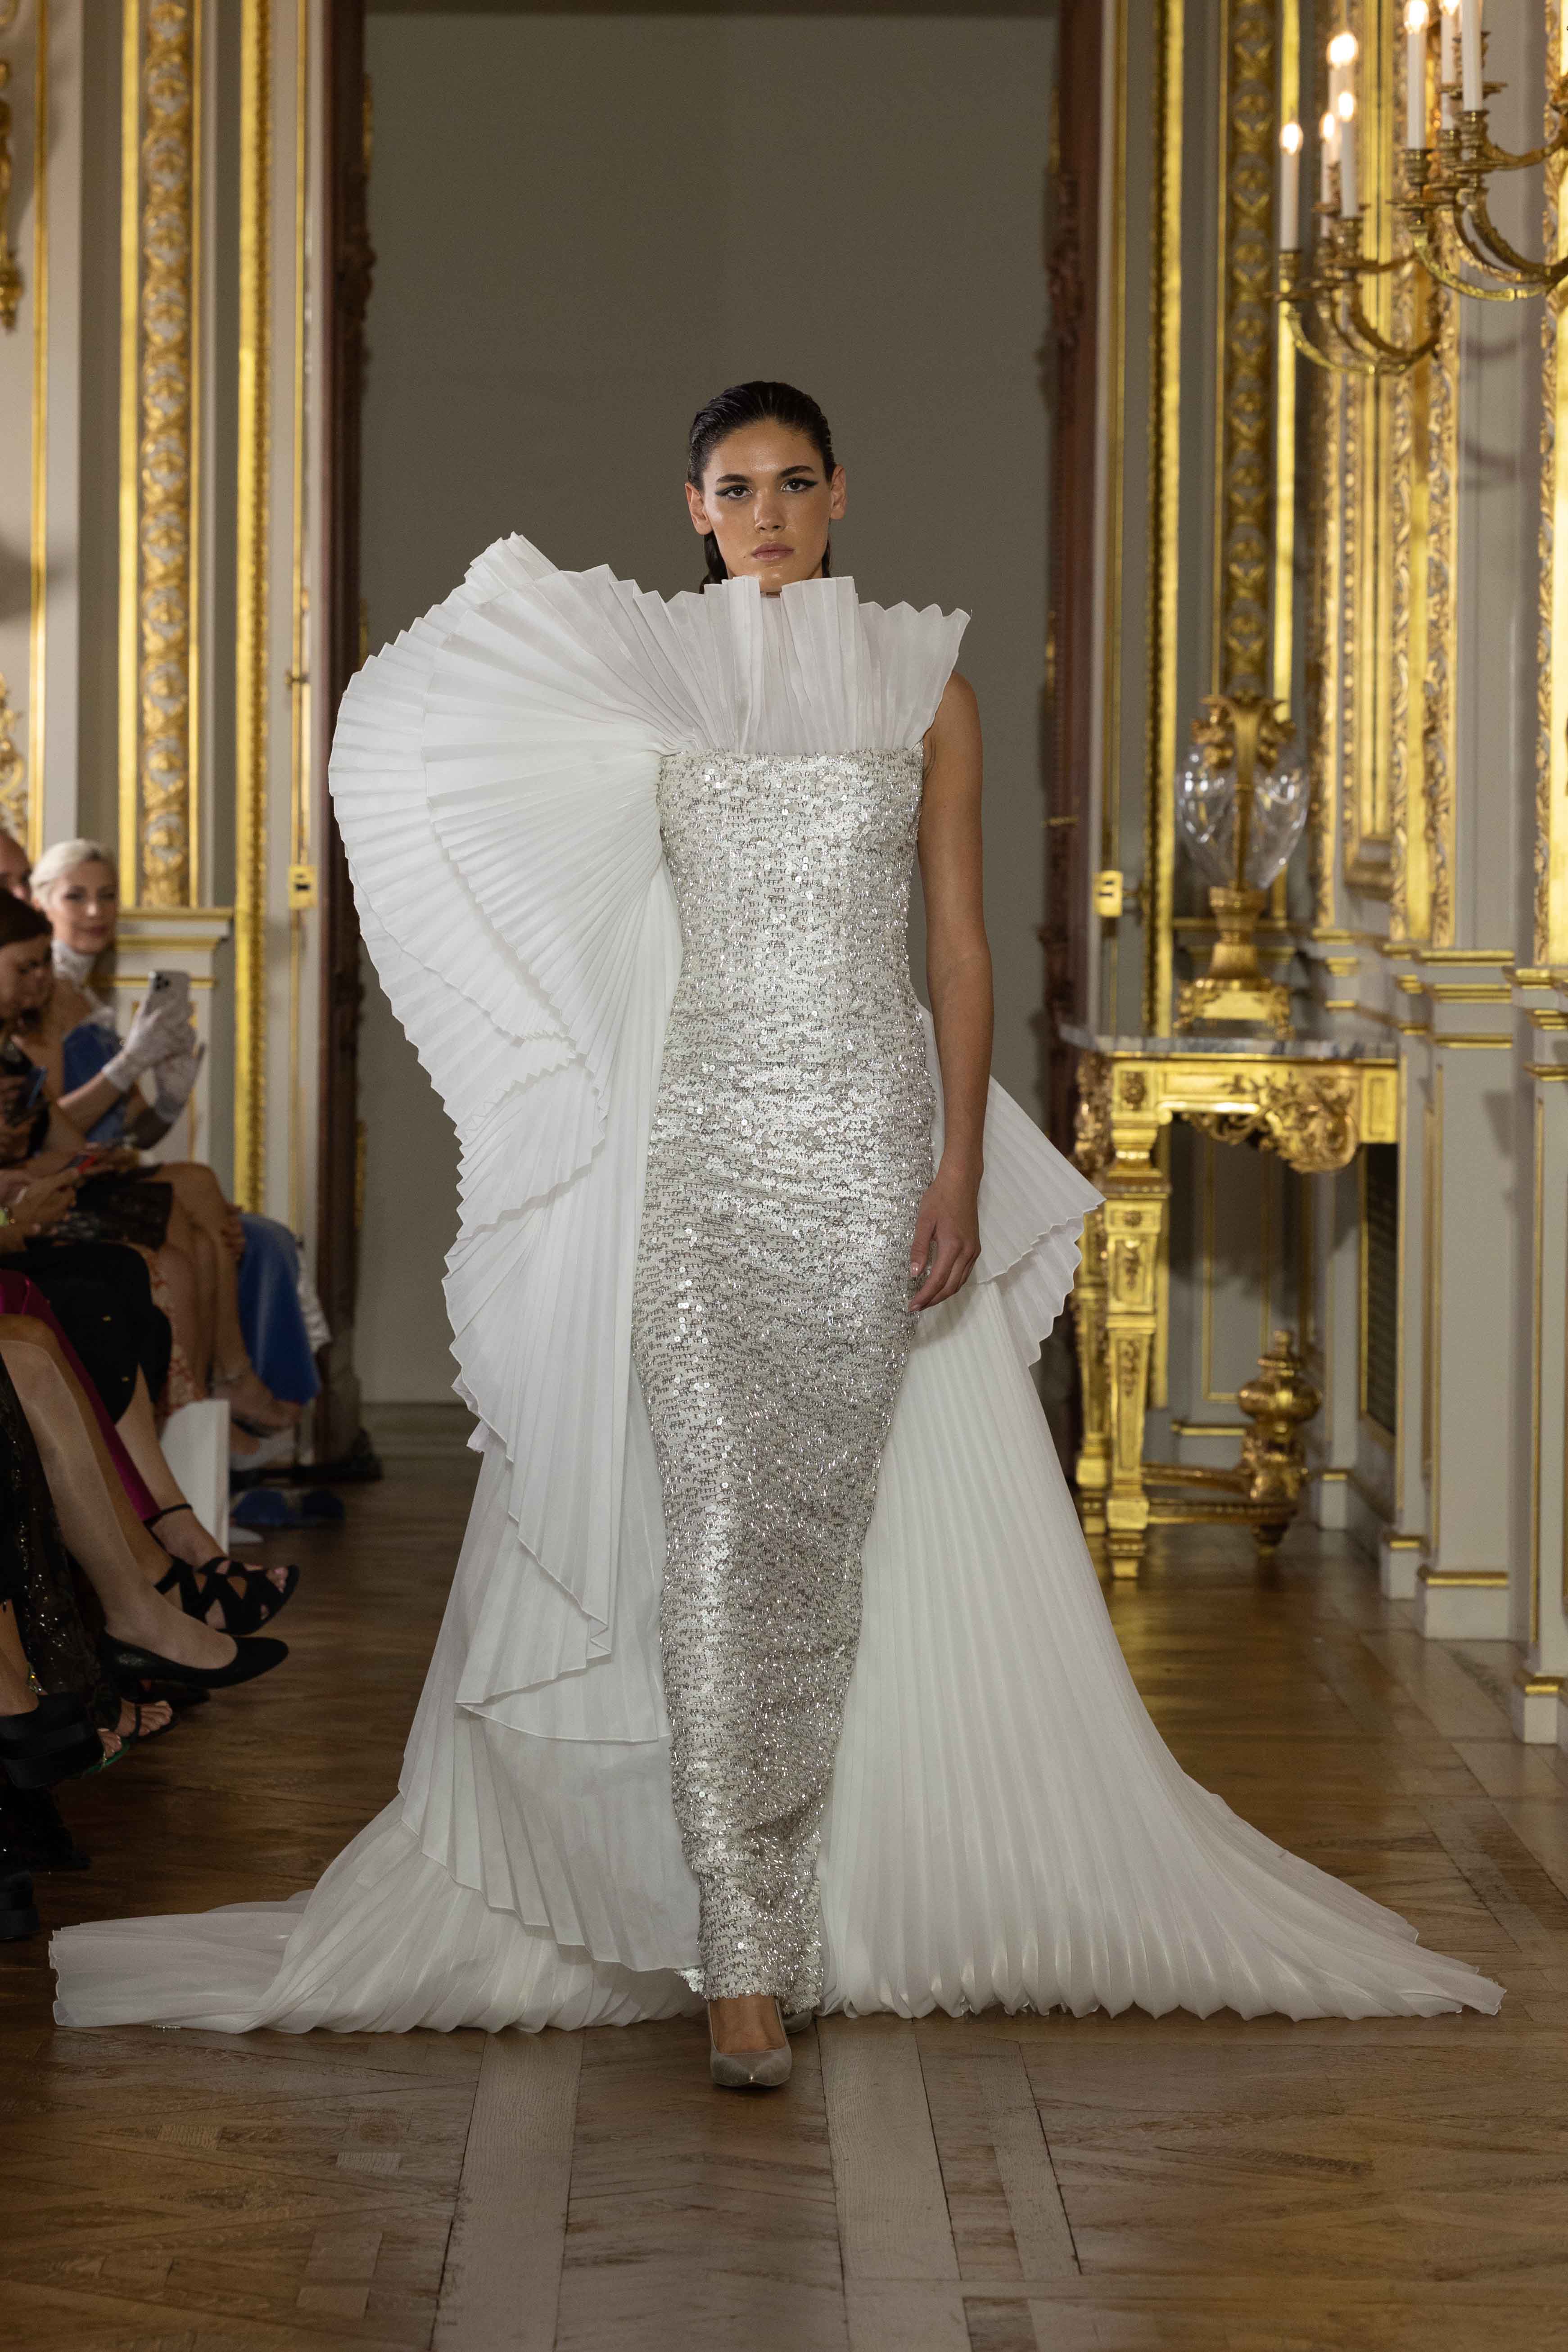 The Best From Paris Couture Week, Courtesy Of Arab Designers